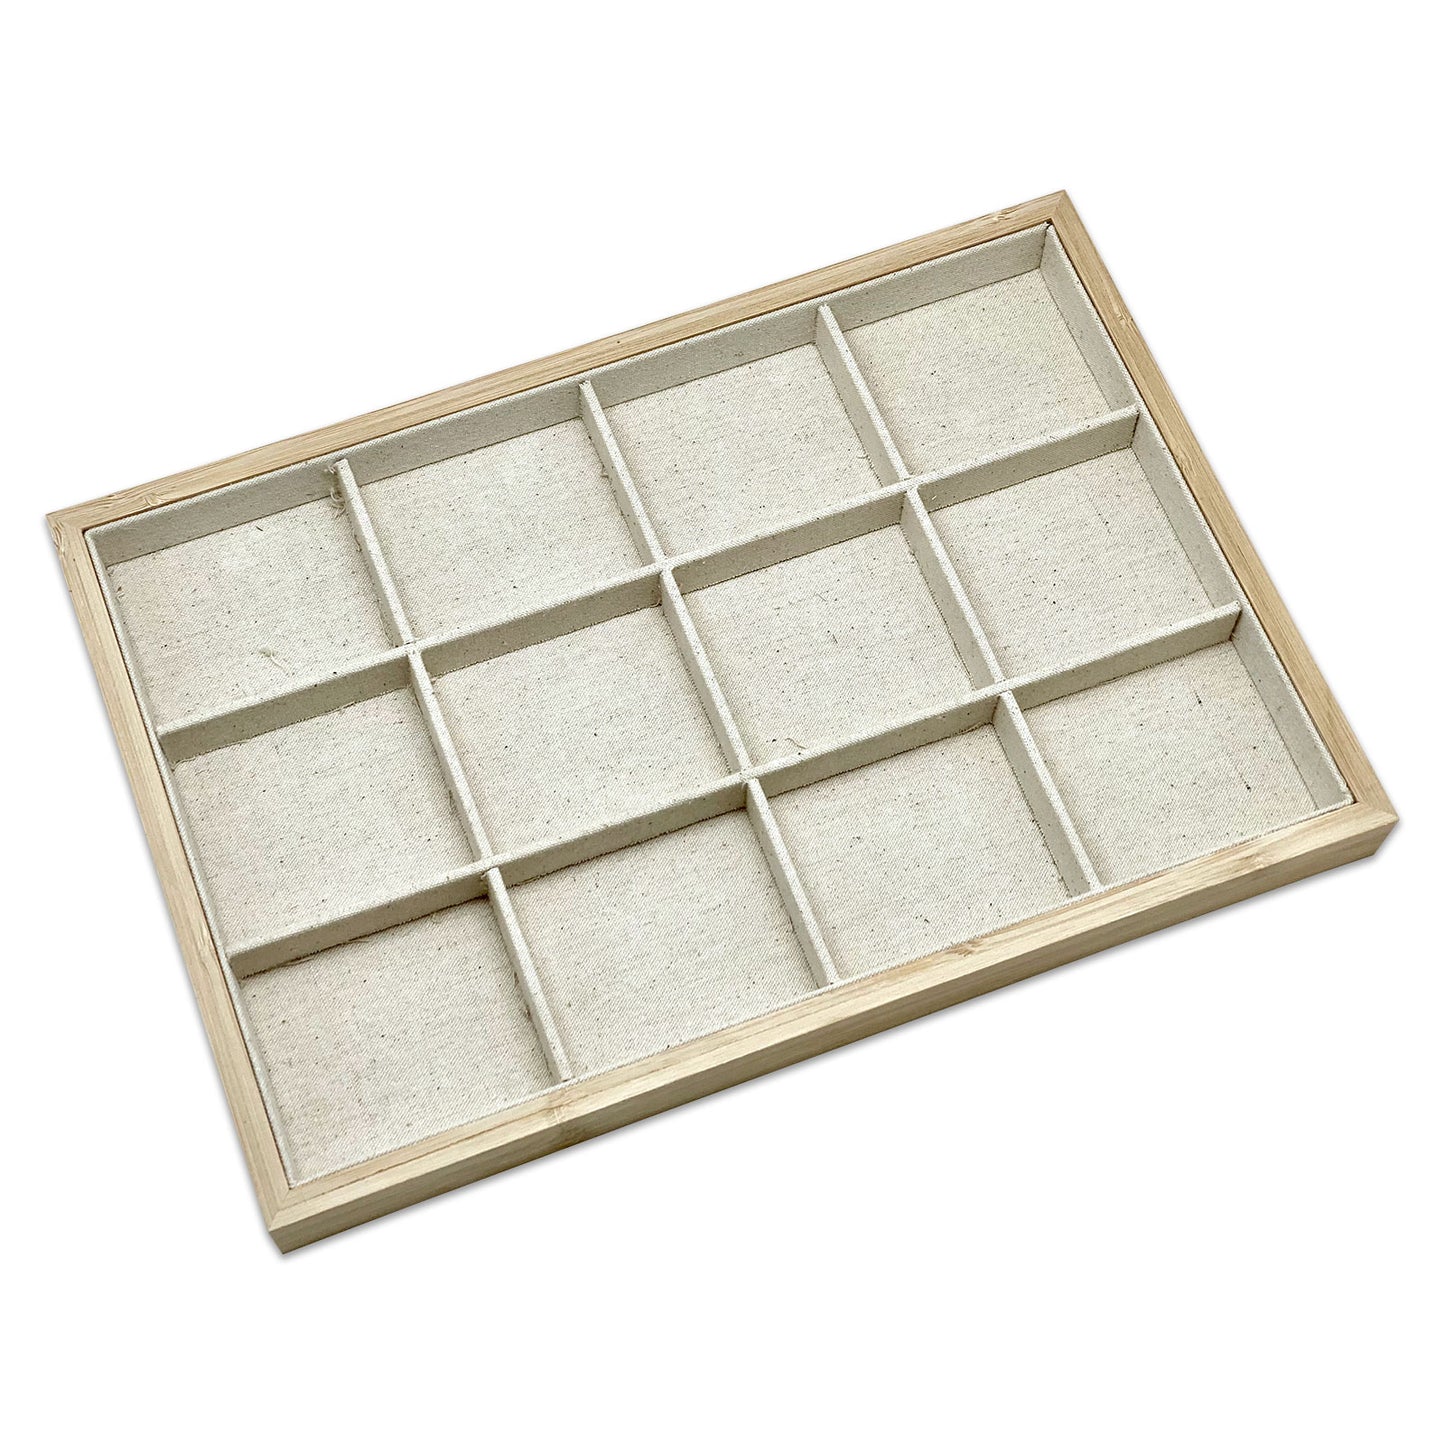 14" x 9 1/2" Wood and Burlap 12 Compartment Jewelry Display Tray